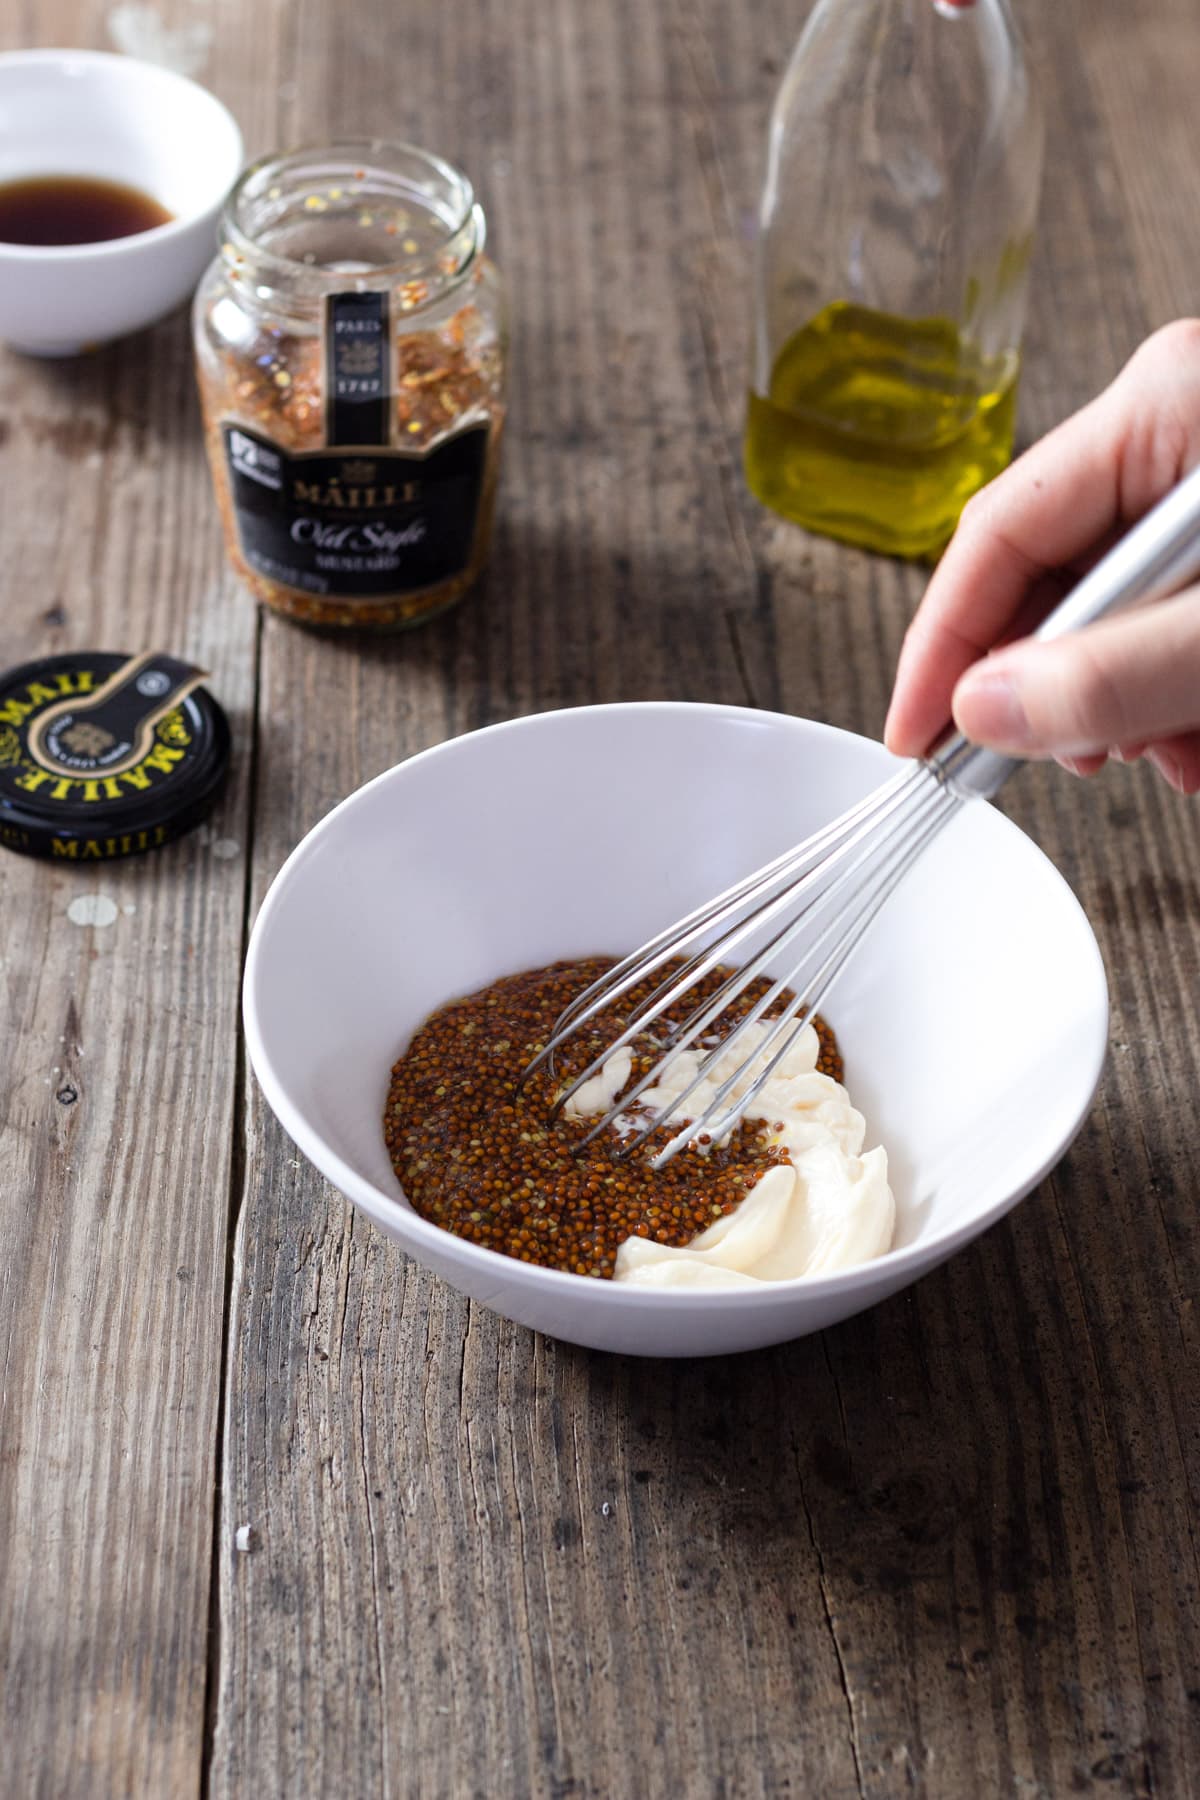 Whisk in a bowl of mayo, mustard seeds, oil and vinegar with ingredients in the background.